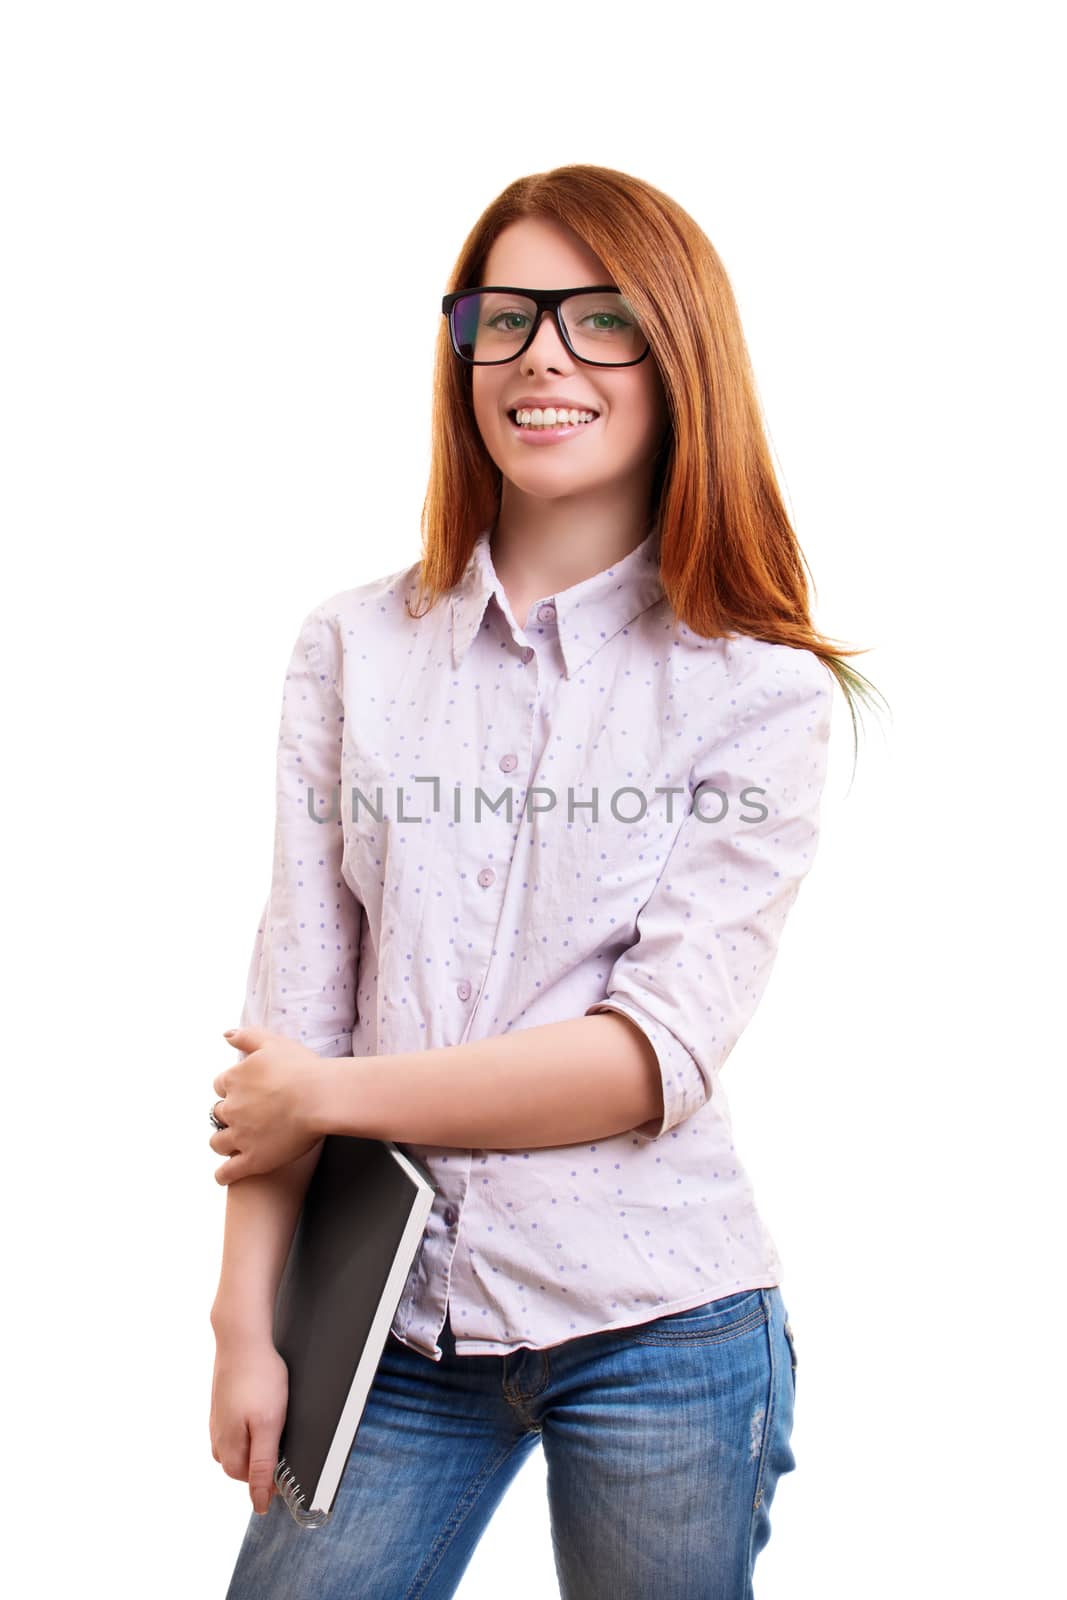 A portrait of a smiling cute nerd girl with glasses, holding a notebook, isolated on white background. I can't wait to go back to school.